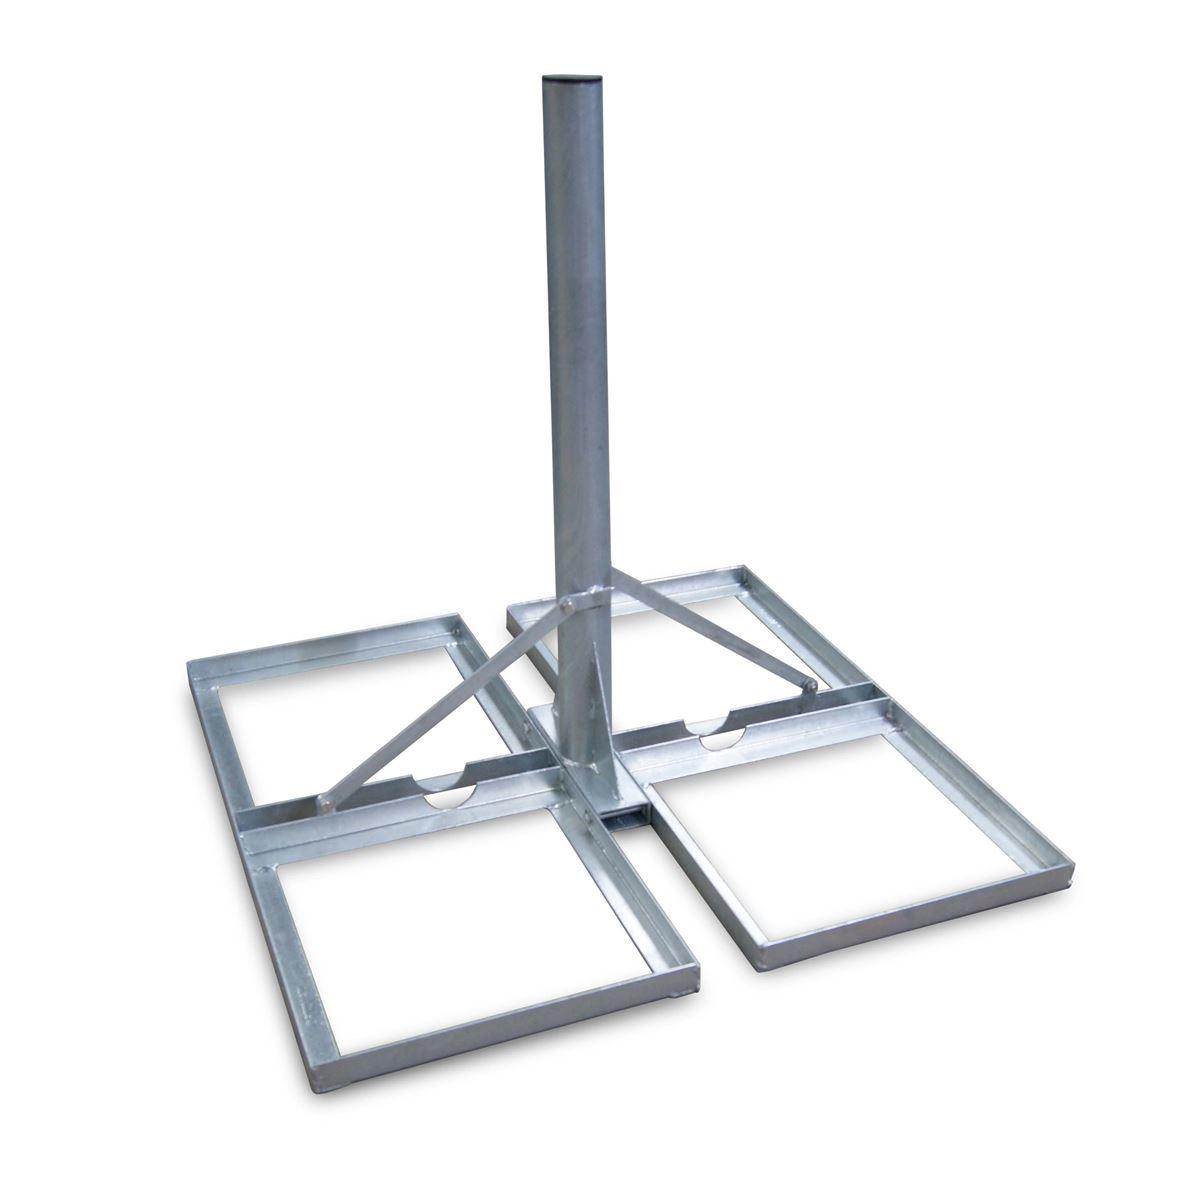 Non-Piercing Roof Mount with 2" Pole